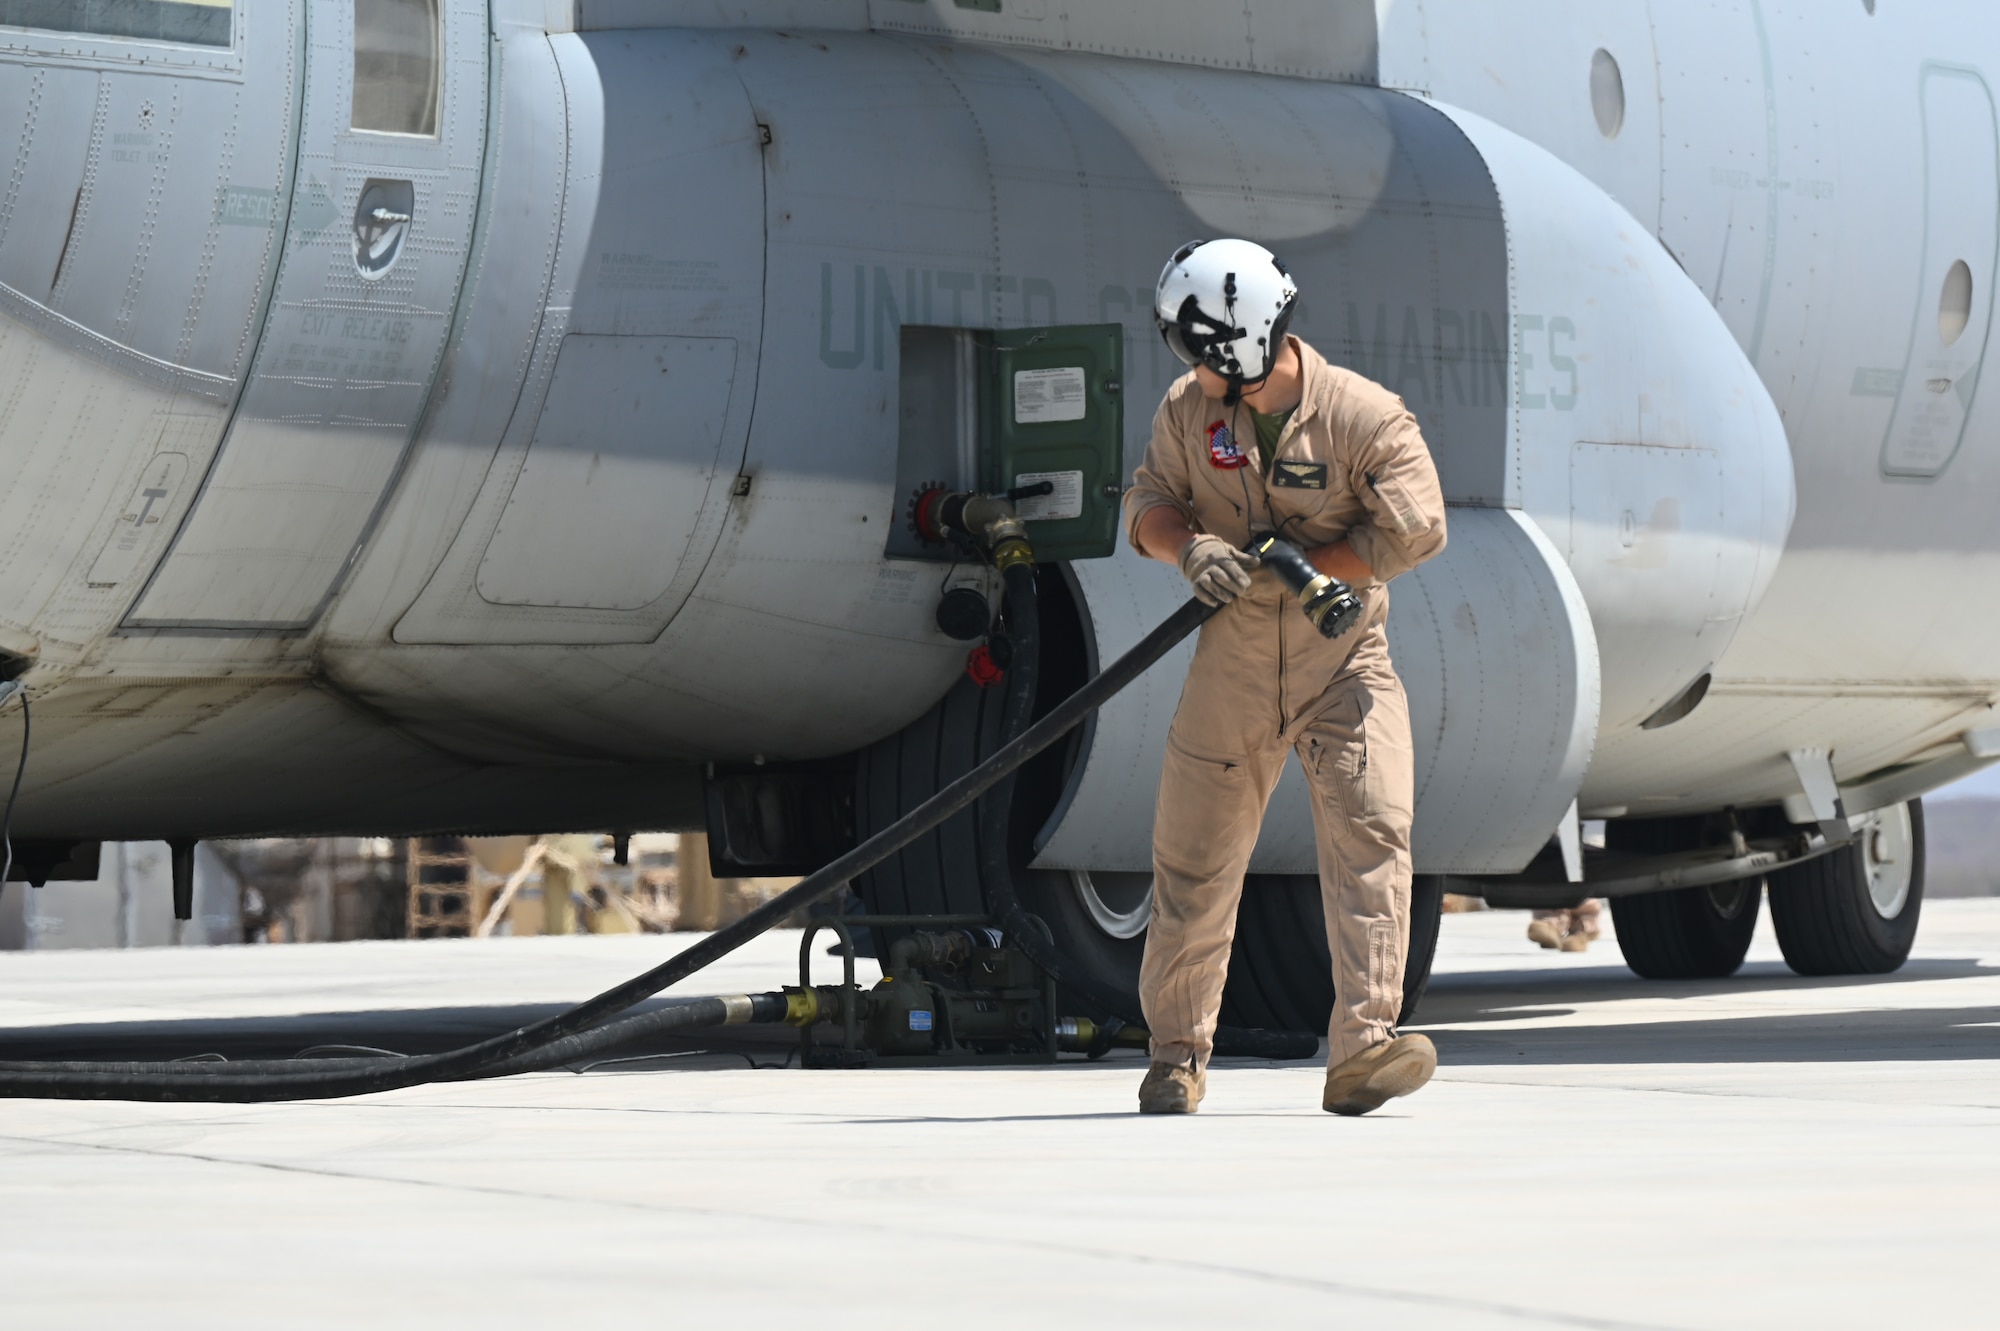 A U.S. Marine Corps KC-130 crew member prepares to conduct a refueling operation in support of a simulated Forward Arming and Refueling Point (FARP) exercise at Chabelley Airfield, Djibouti, Feb. 22, 2023. The FARP mission makes it possible to quickly refuel and rearm because aircraft supporting combat operations can refuel much closer to their area of operation, saving a significant amount of time. (U.S. Air Force photo by Tech. Sgt. Jayson Burns)